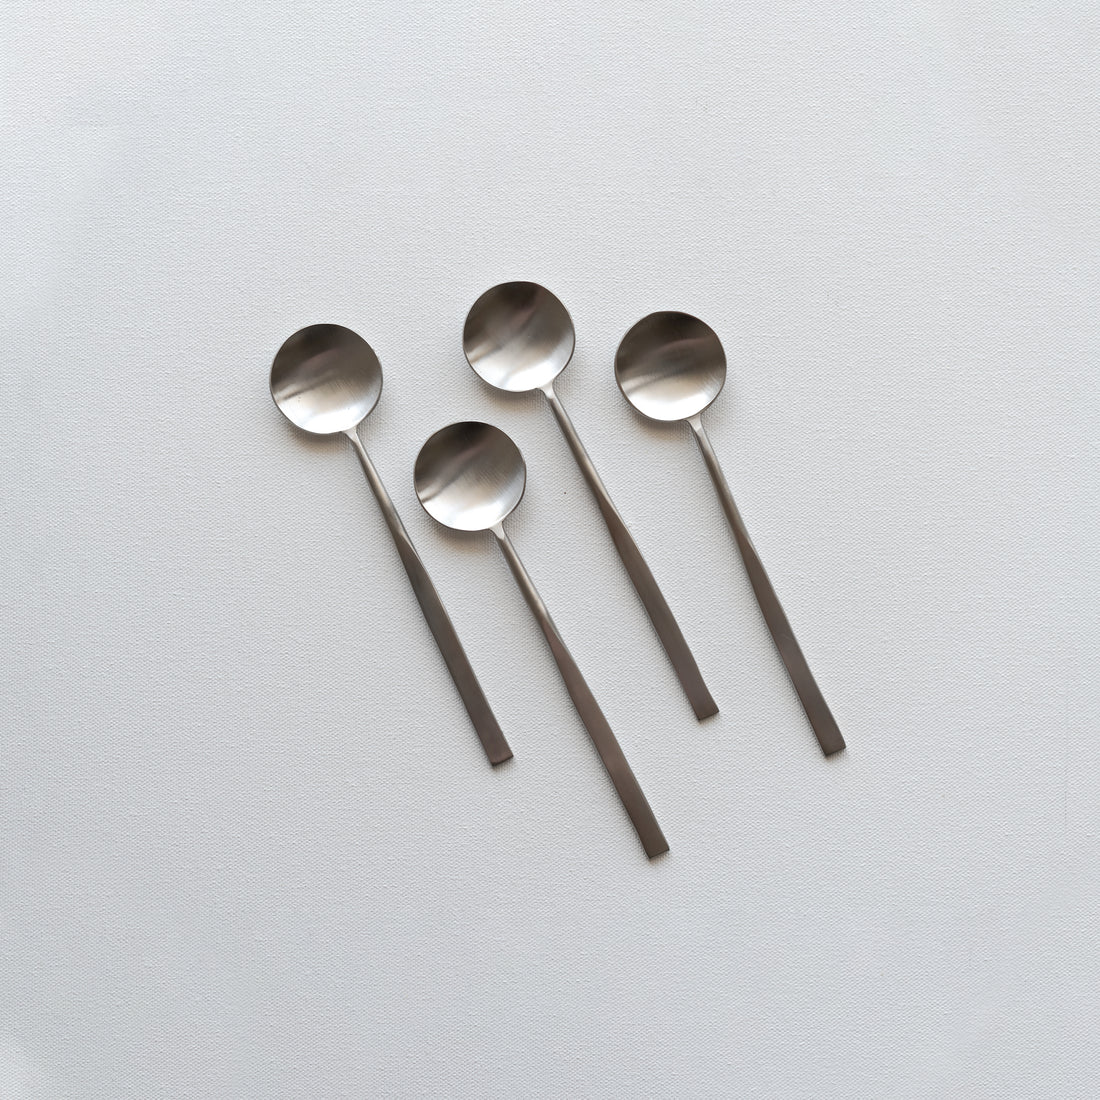 Set of 4 stainless steel spoons by fleck